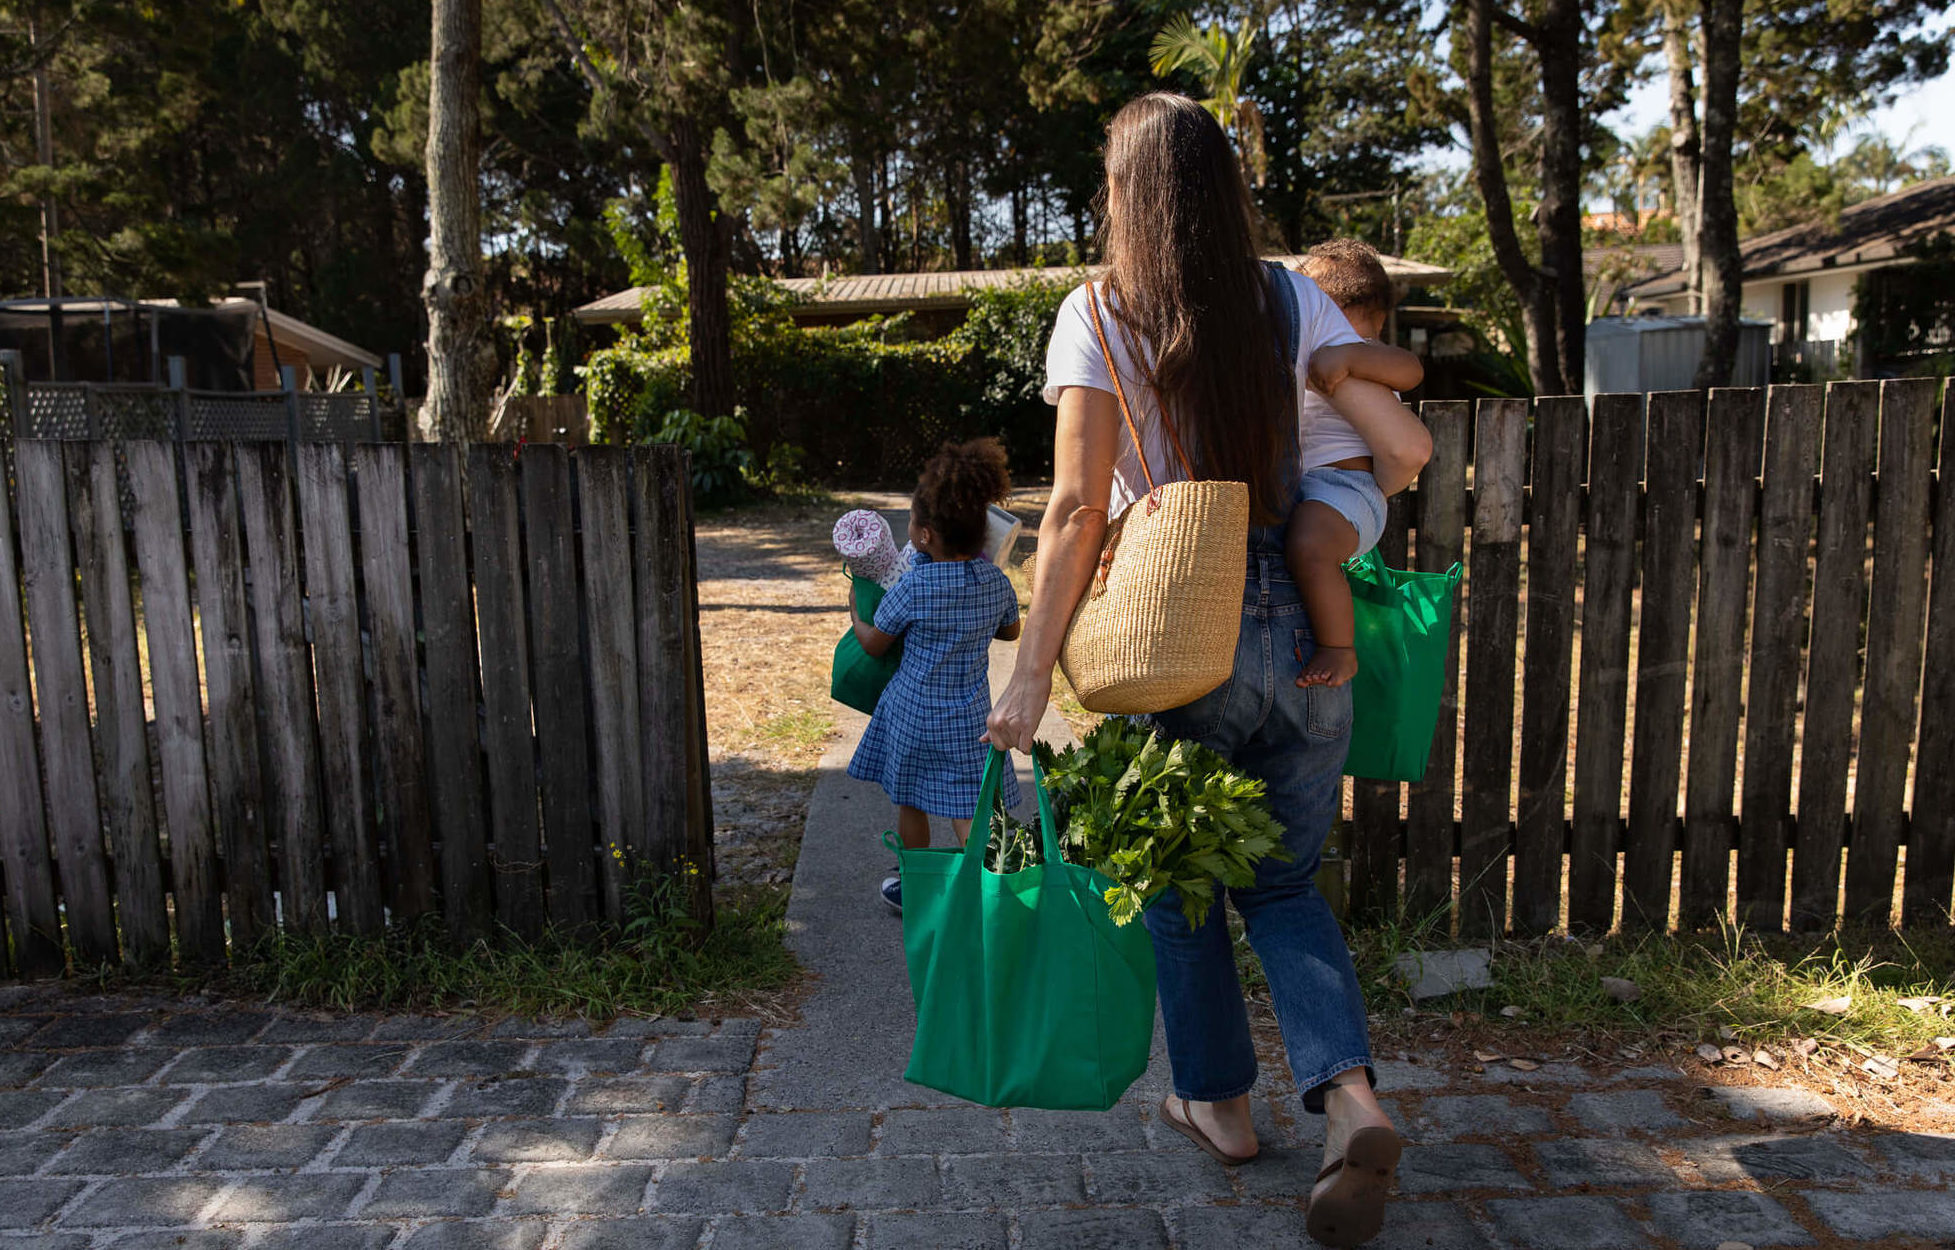 A woman and two kids carry bags of groceries. April 2021